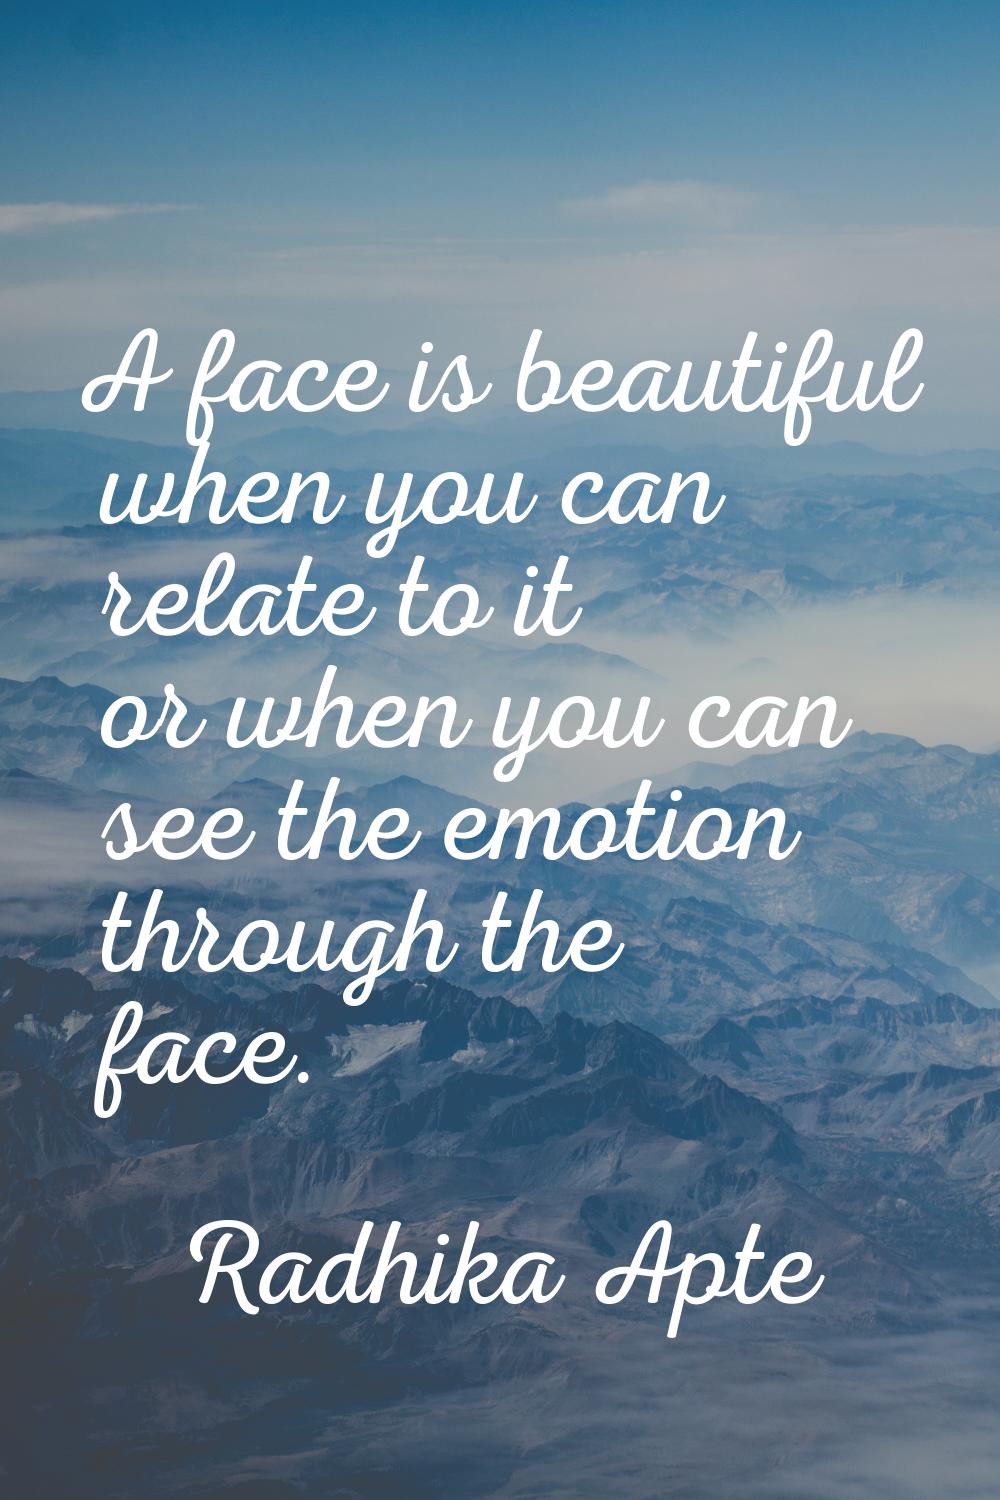 A face is beautiful when you can relate to it or when you can see the emotion through the face.